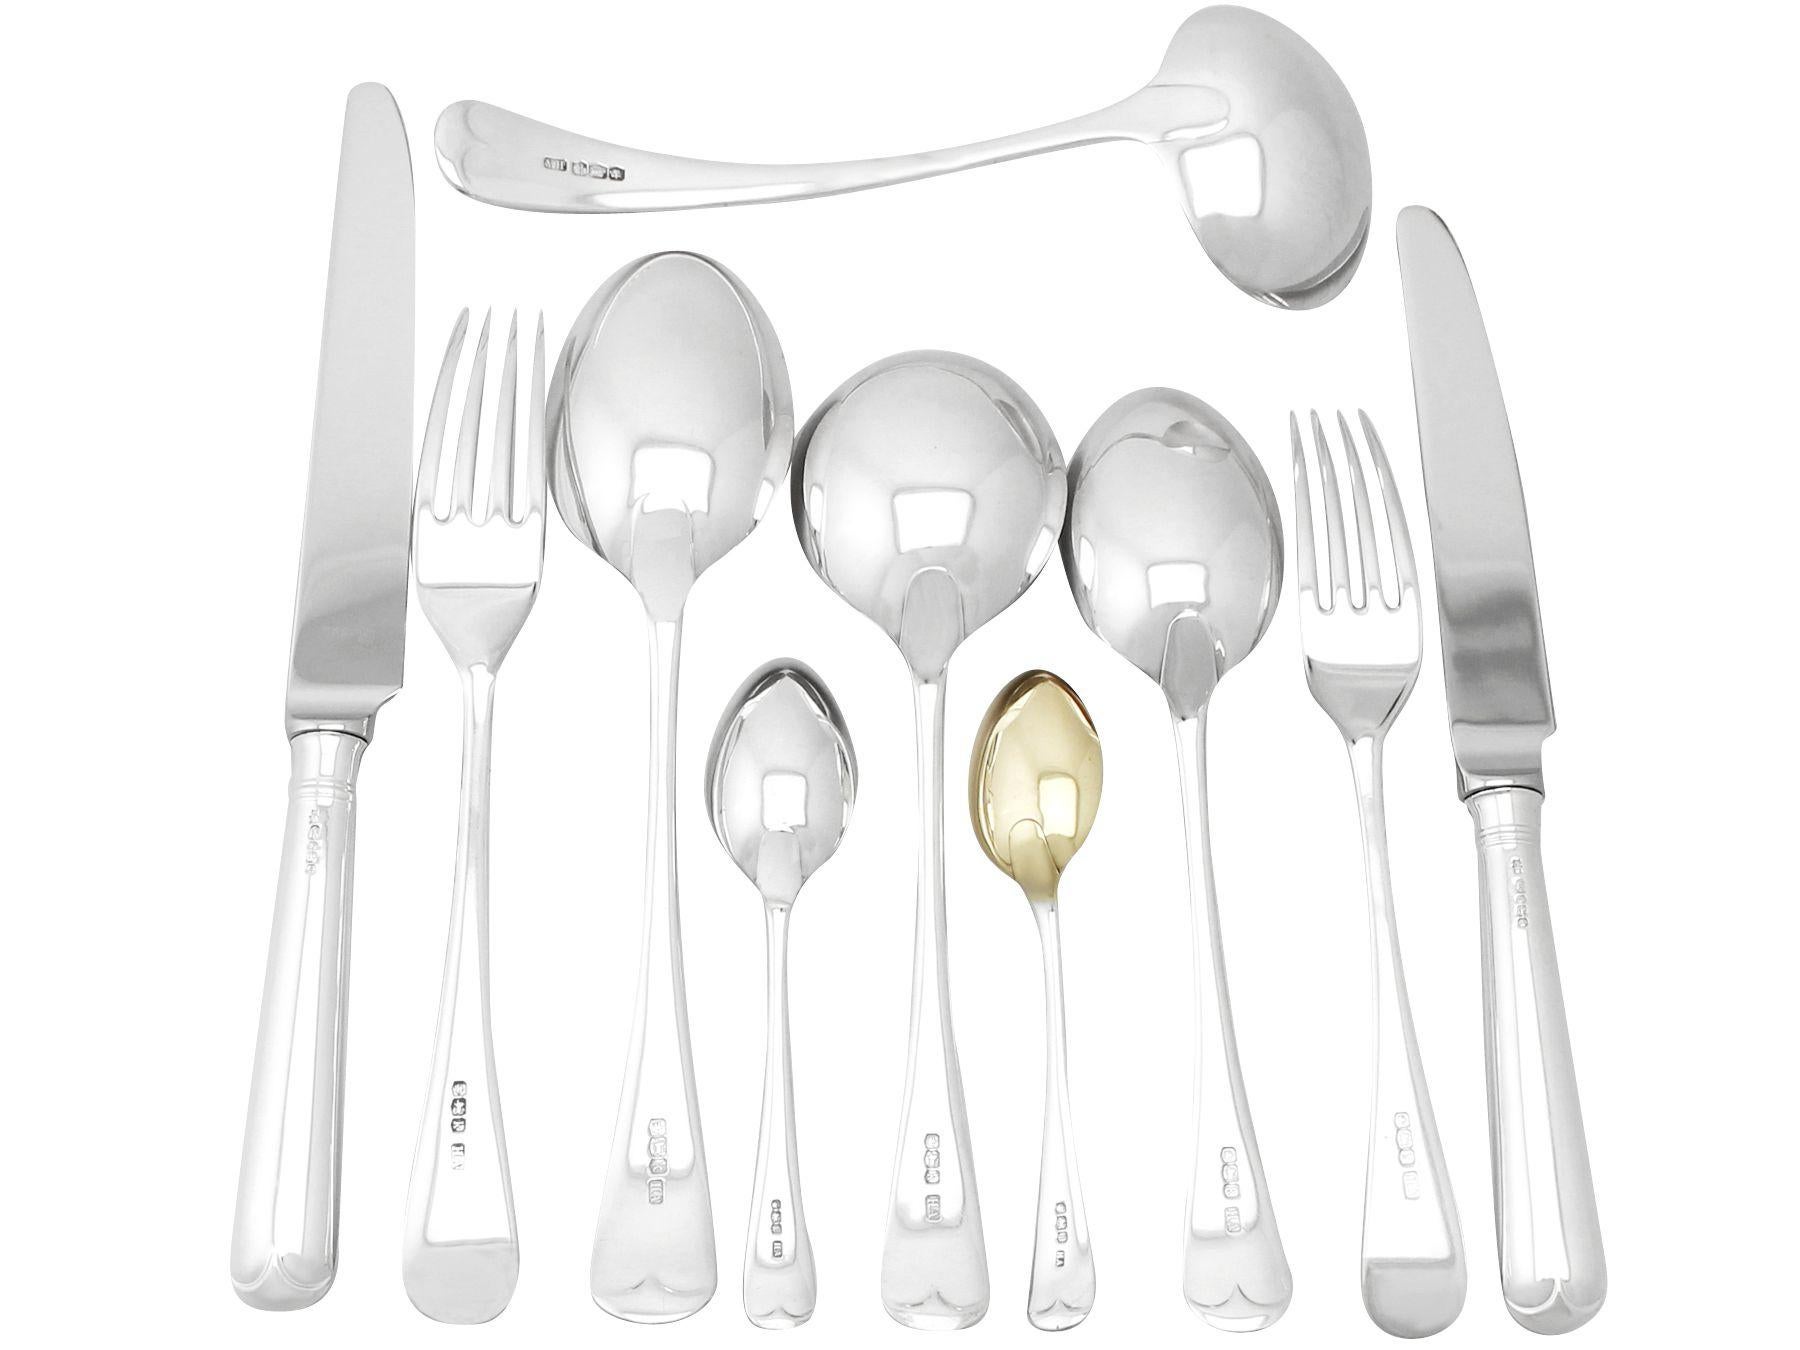 An exceptional, fine and impressive antique George V English straight sterling silver Old English pattern flatware set / service for six persons; an addition to our canteen of cutlery collection.

The pieces of this exceptional, antique George V